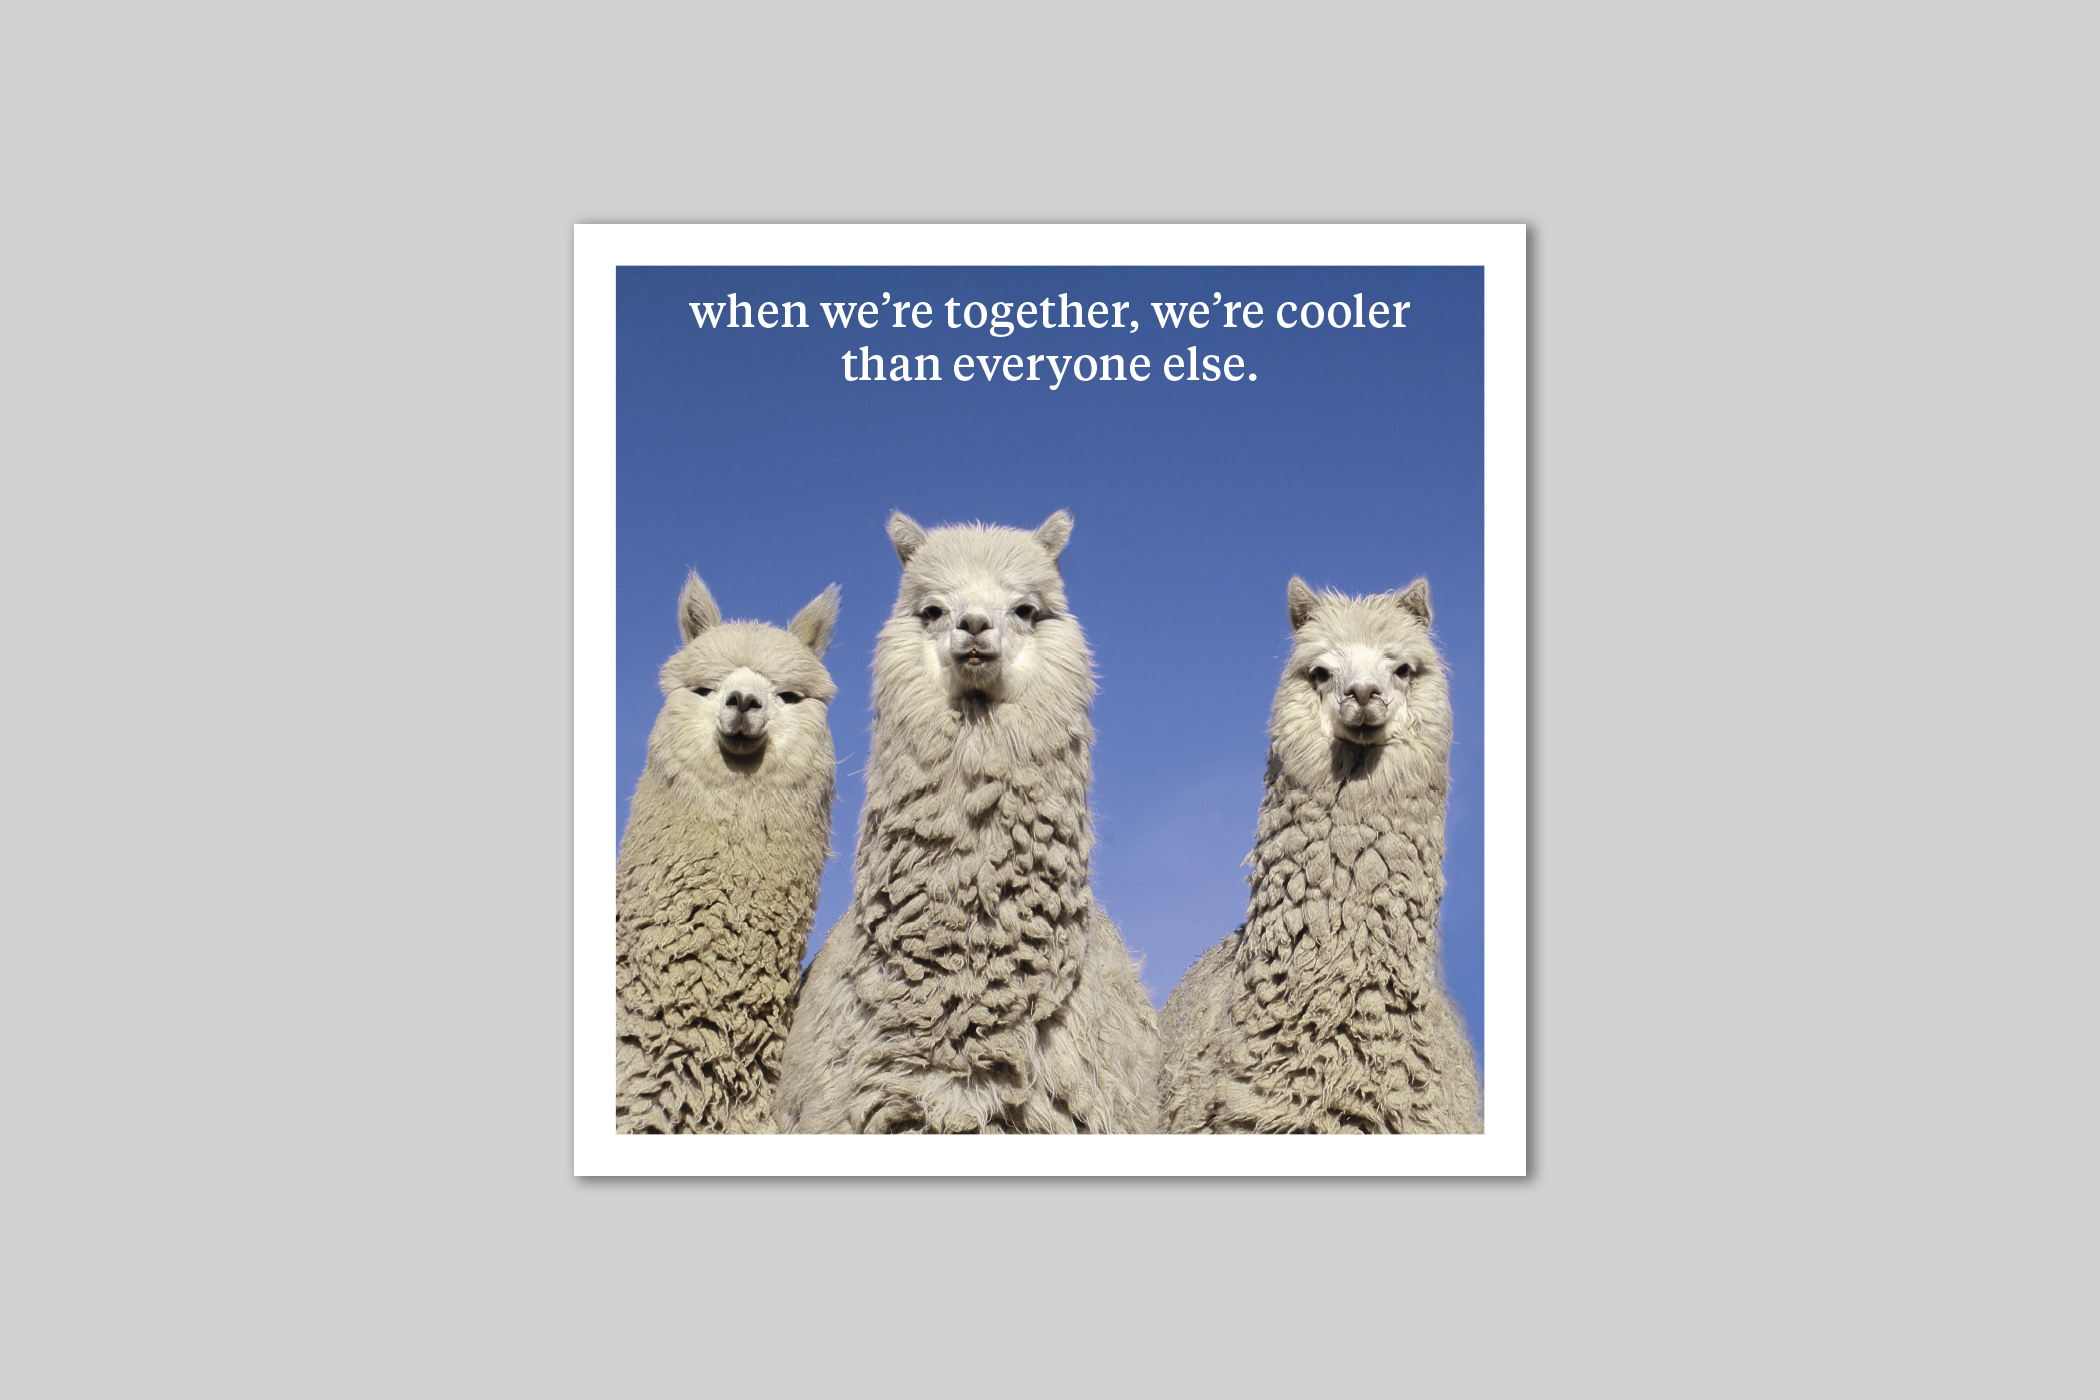 We're Cool quirky animal portrait from Curious World range of greeting cards by Icon.